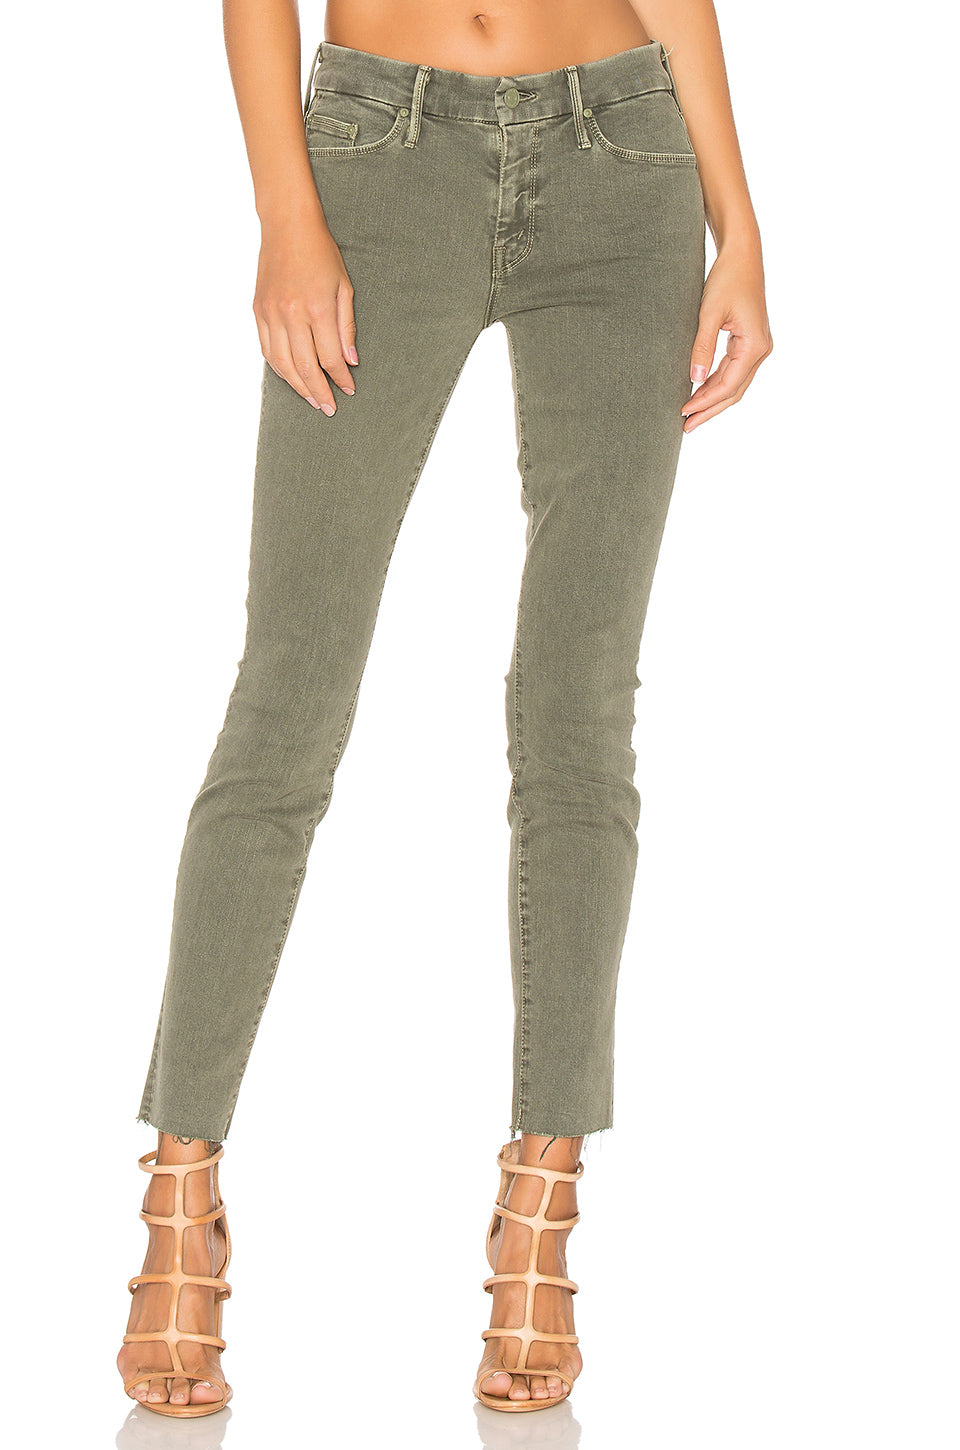 MOTHER - High Waist Looker Ankle Fray Denim Jeans in Army Green